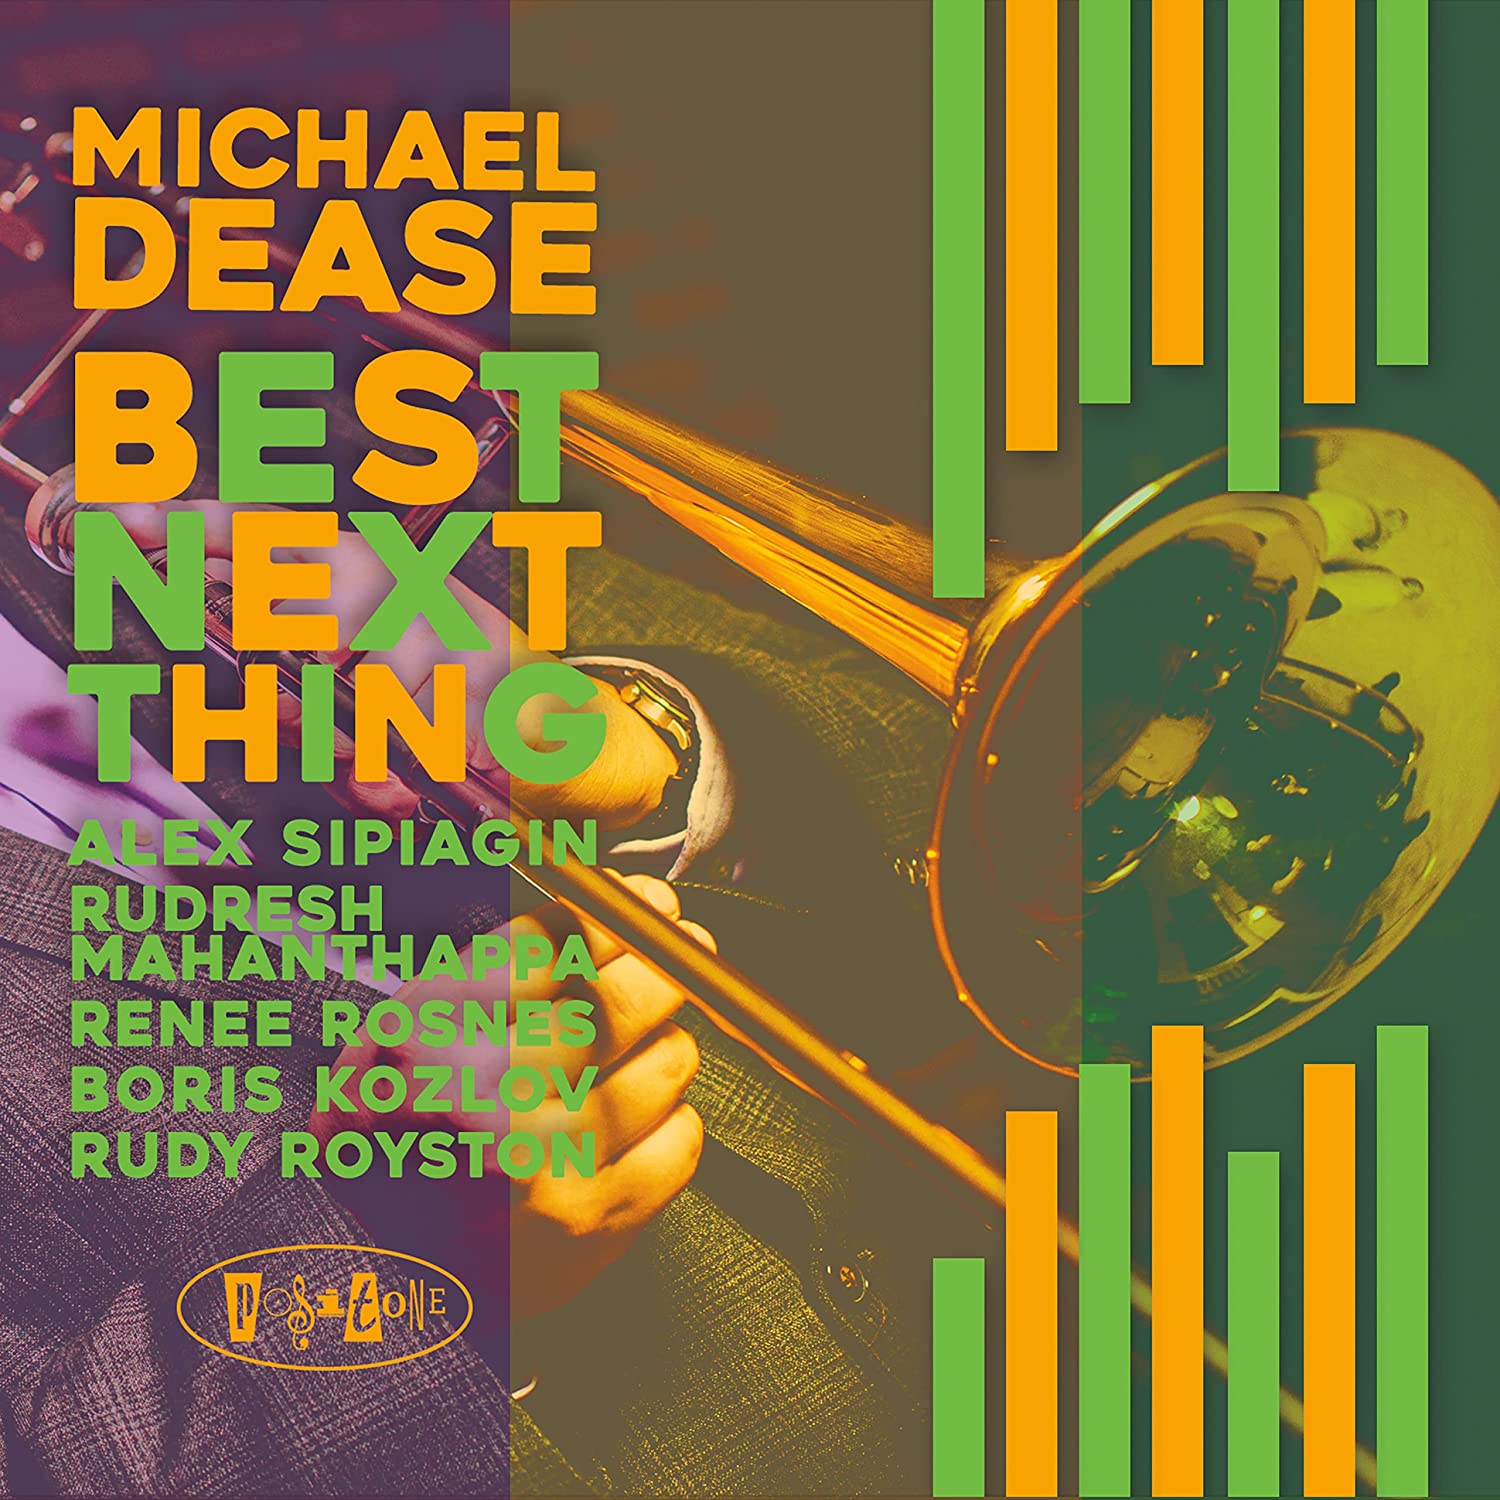 MICHAEL DEASE - Best Next Thing cover 